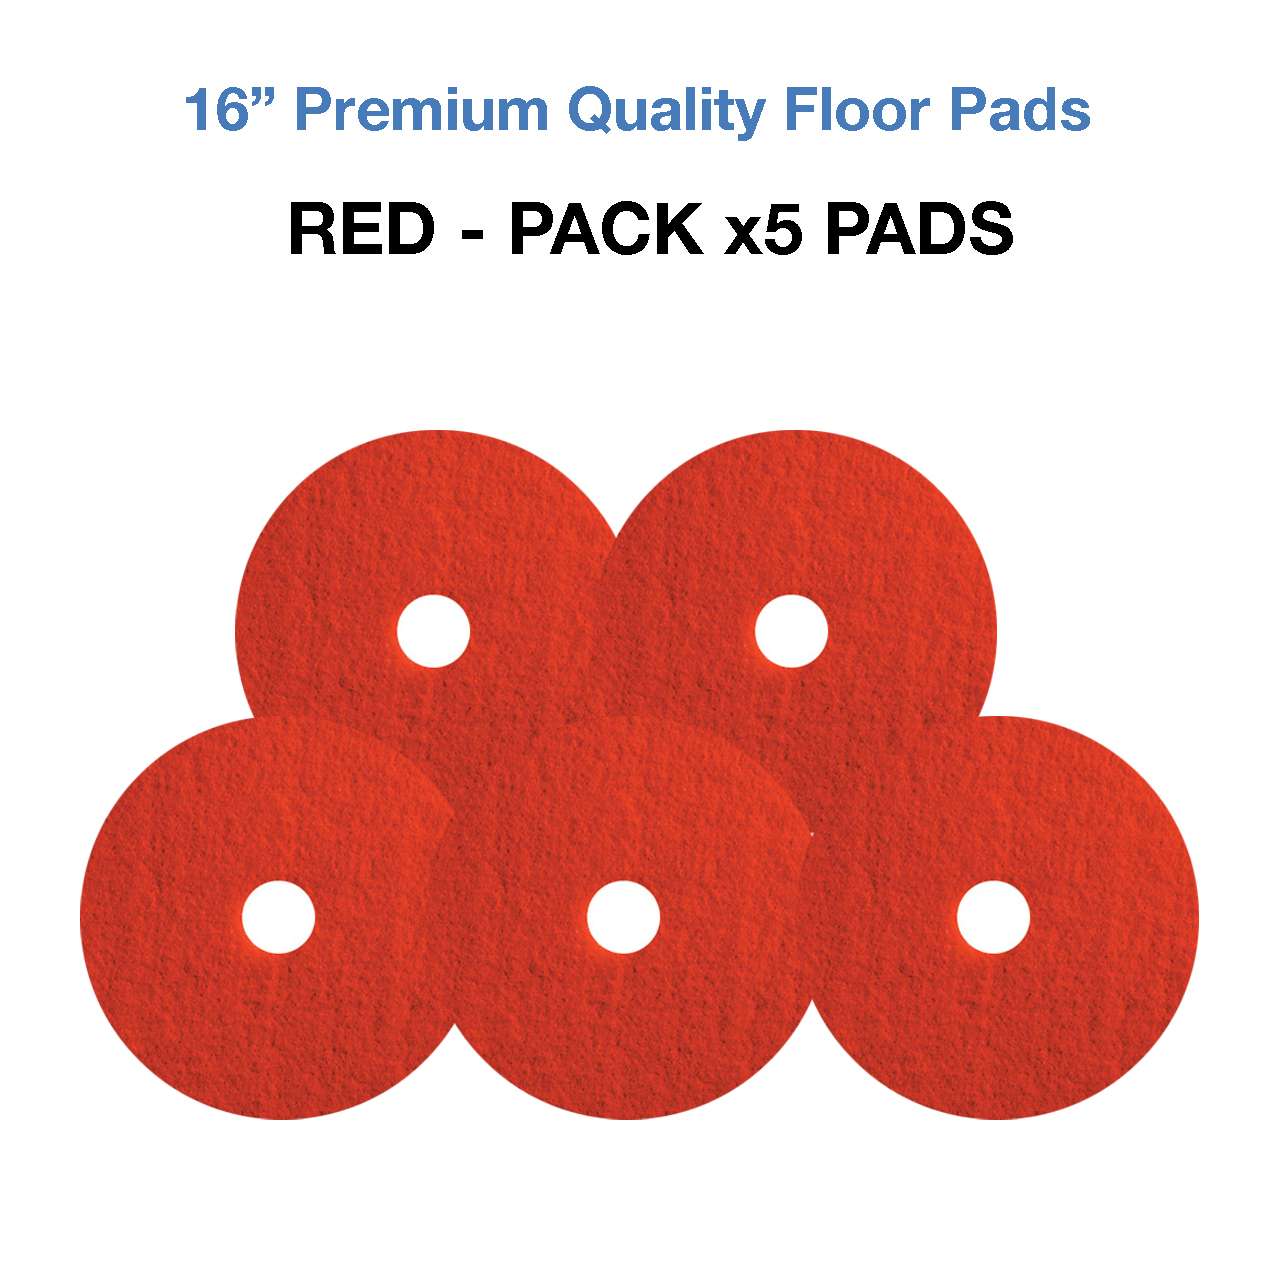 16 INCH RED FLOOR PADS FOR CLEANING AND BUFFING FLOORS. 